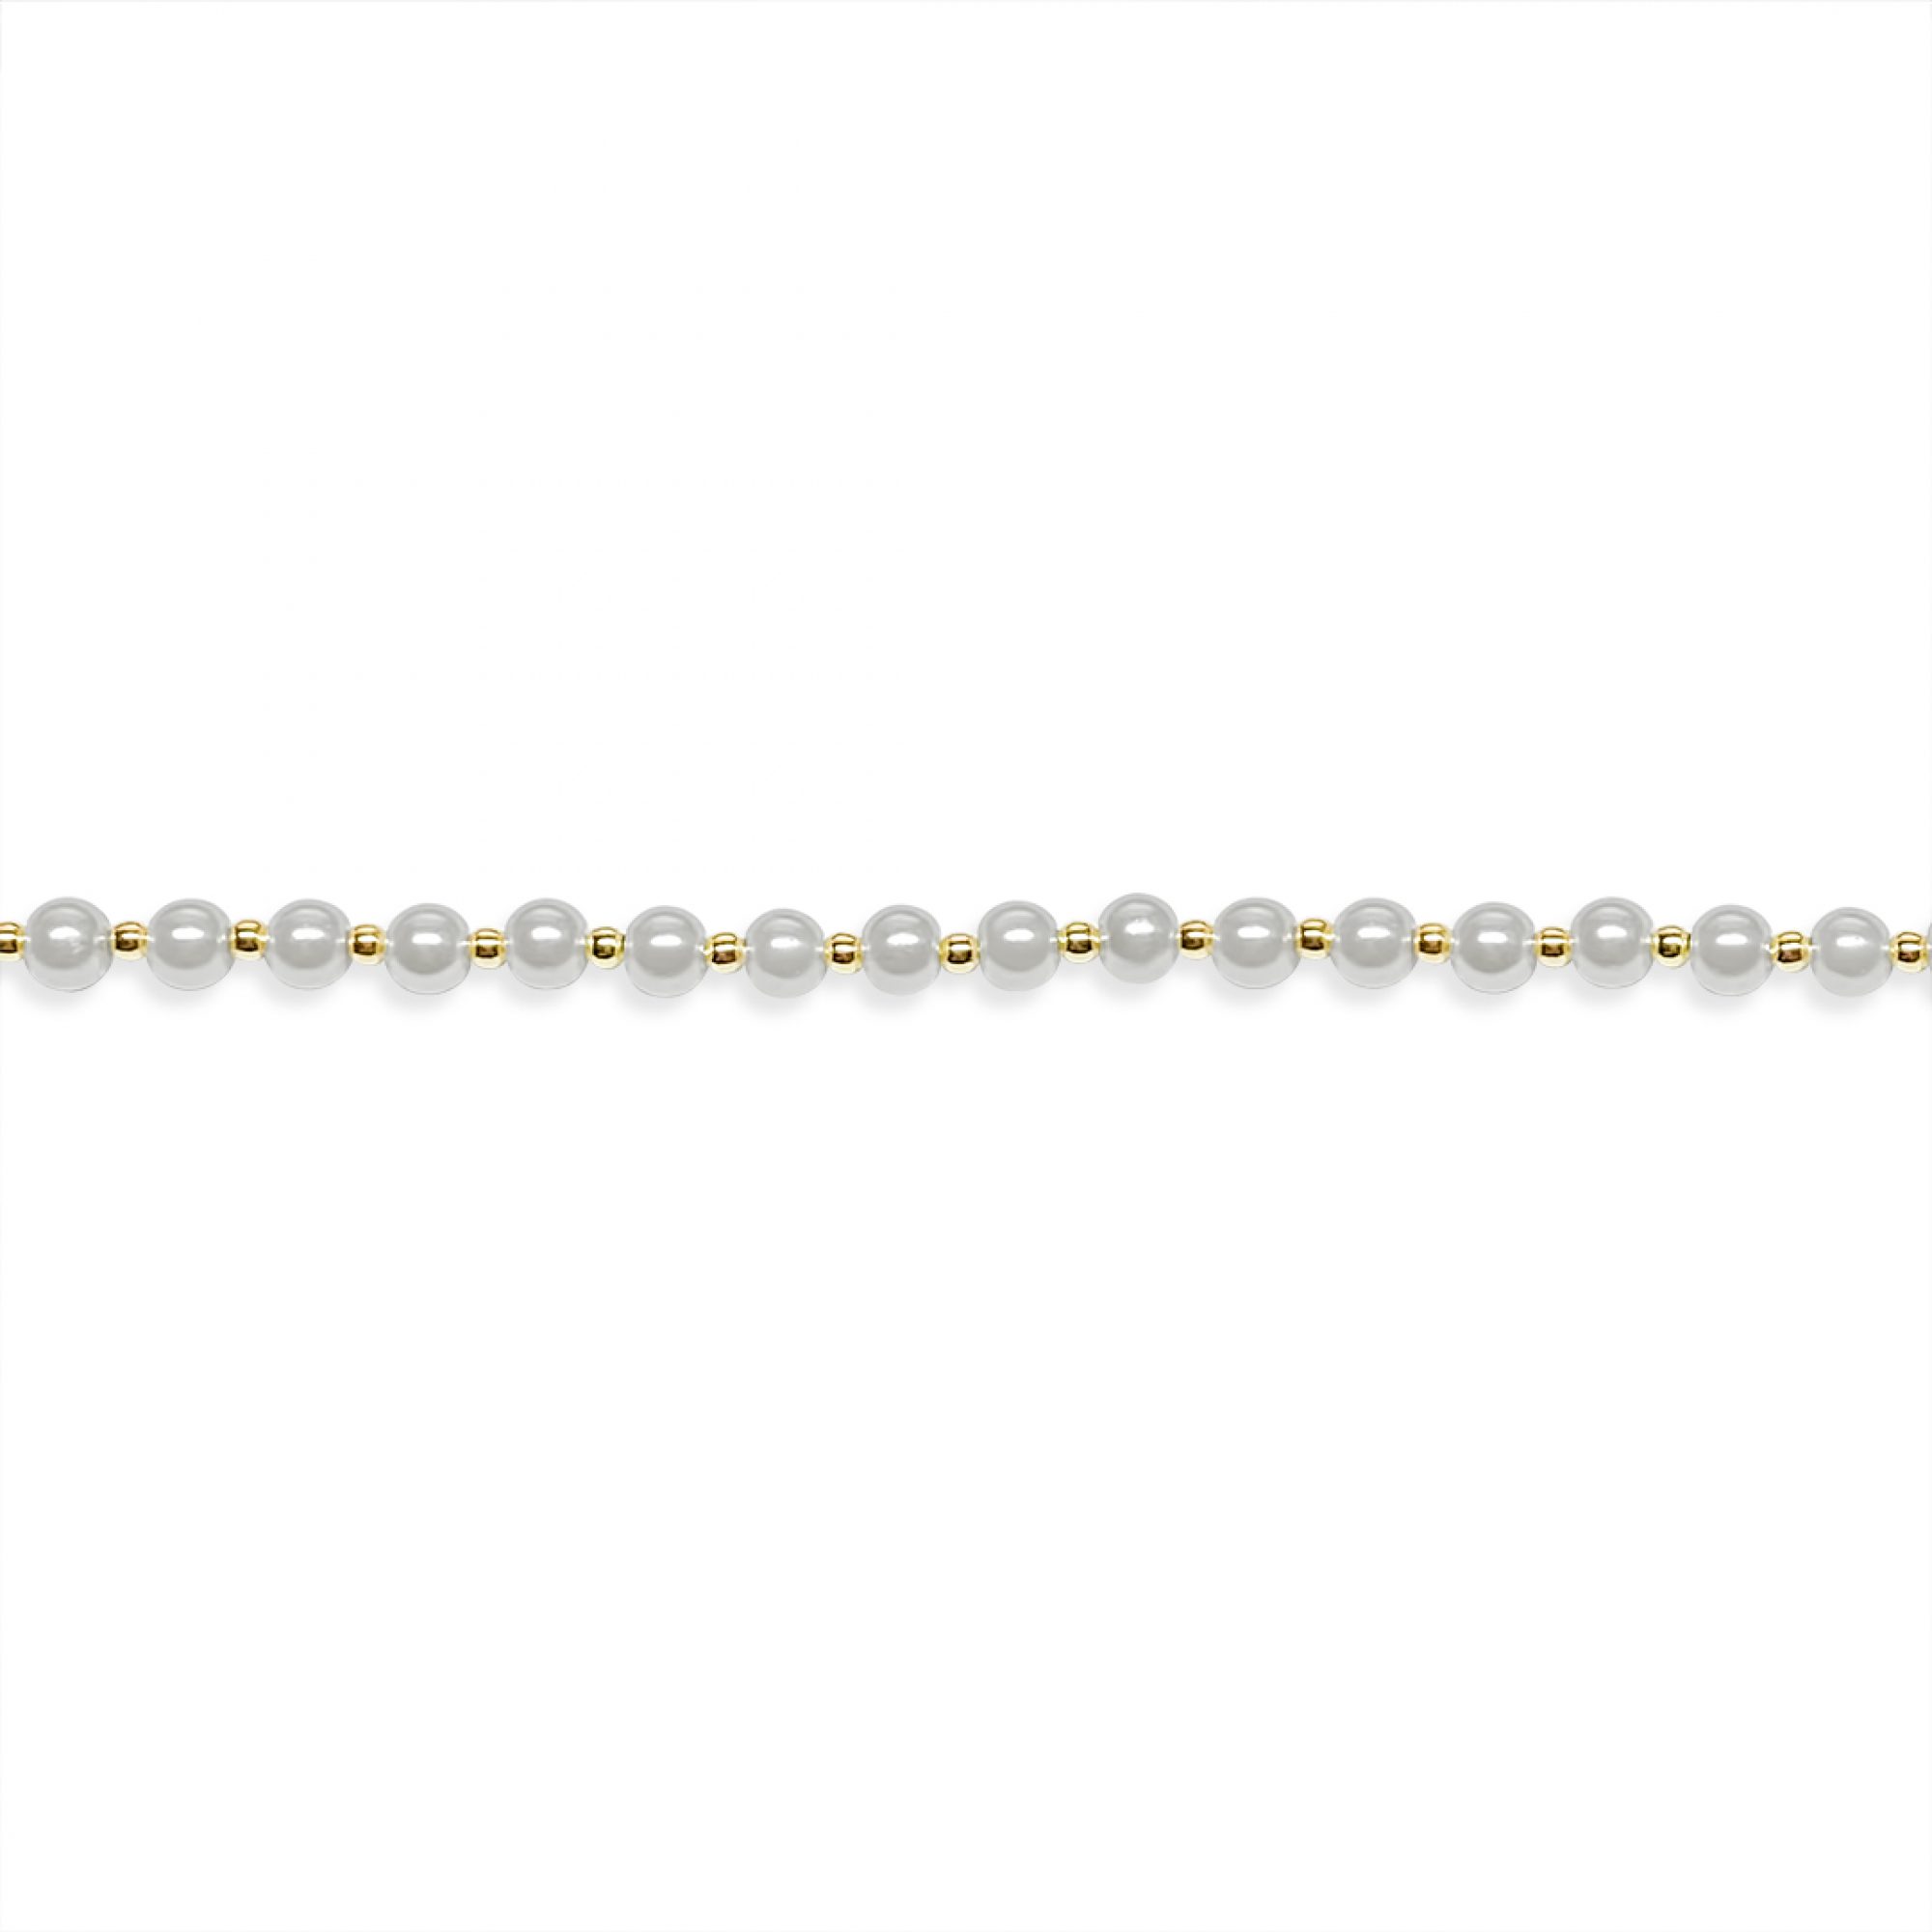 Gold plated bracelet with pearls